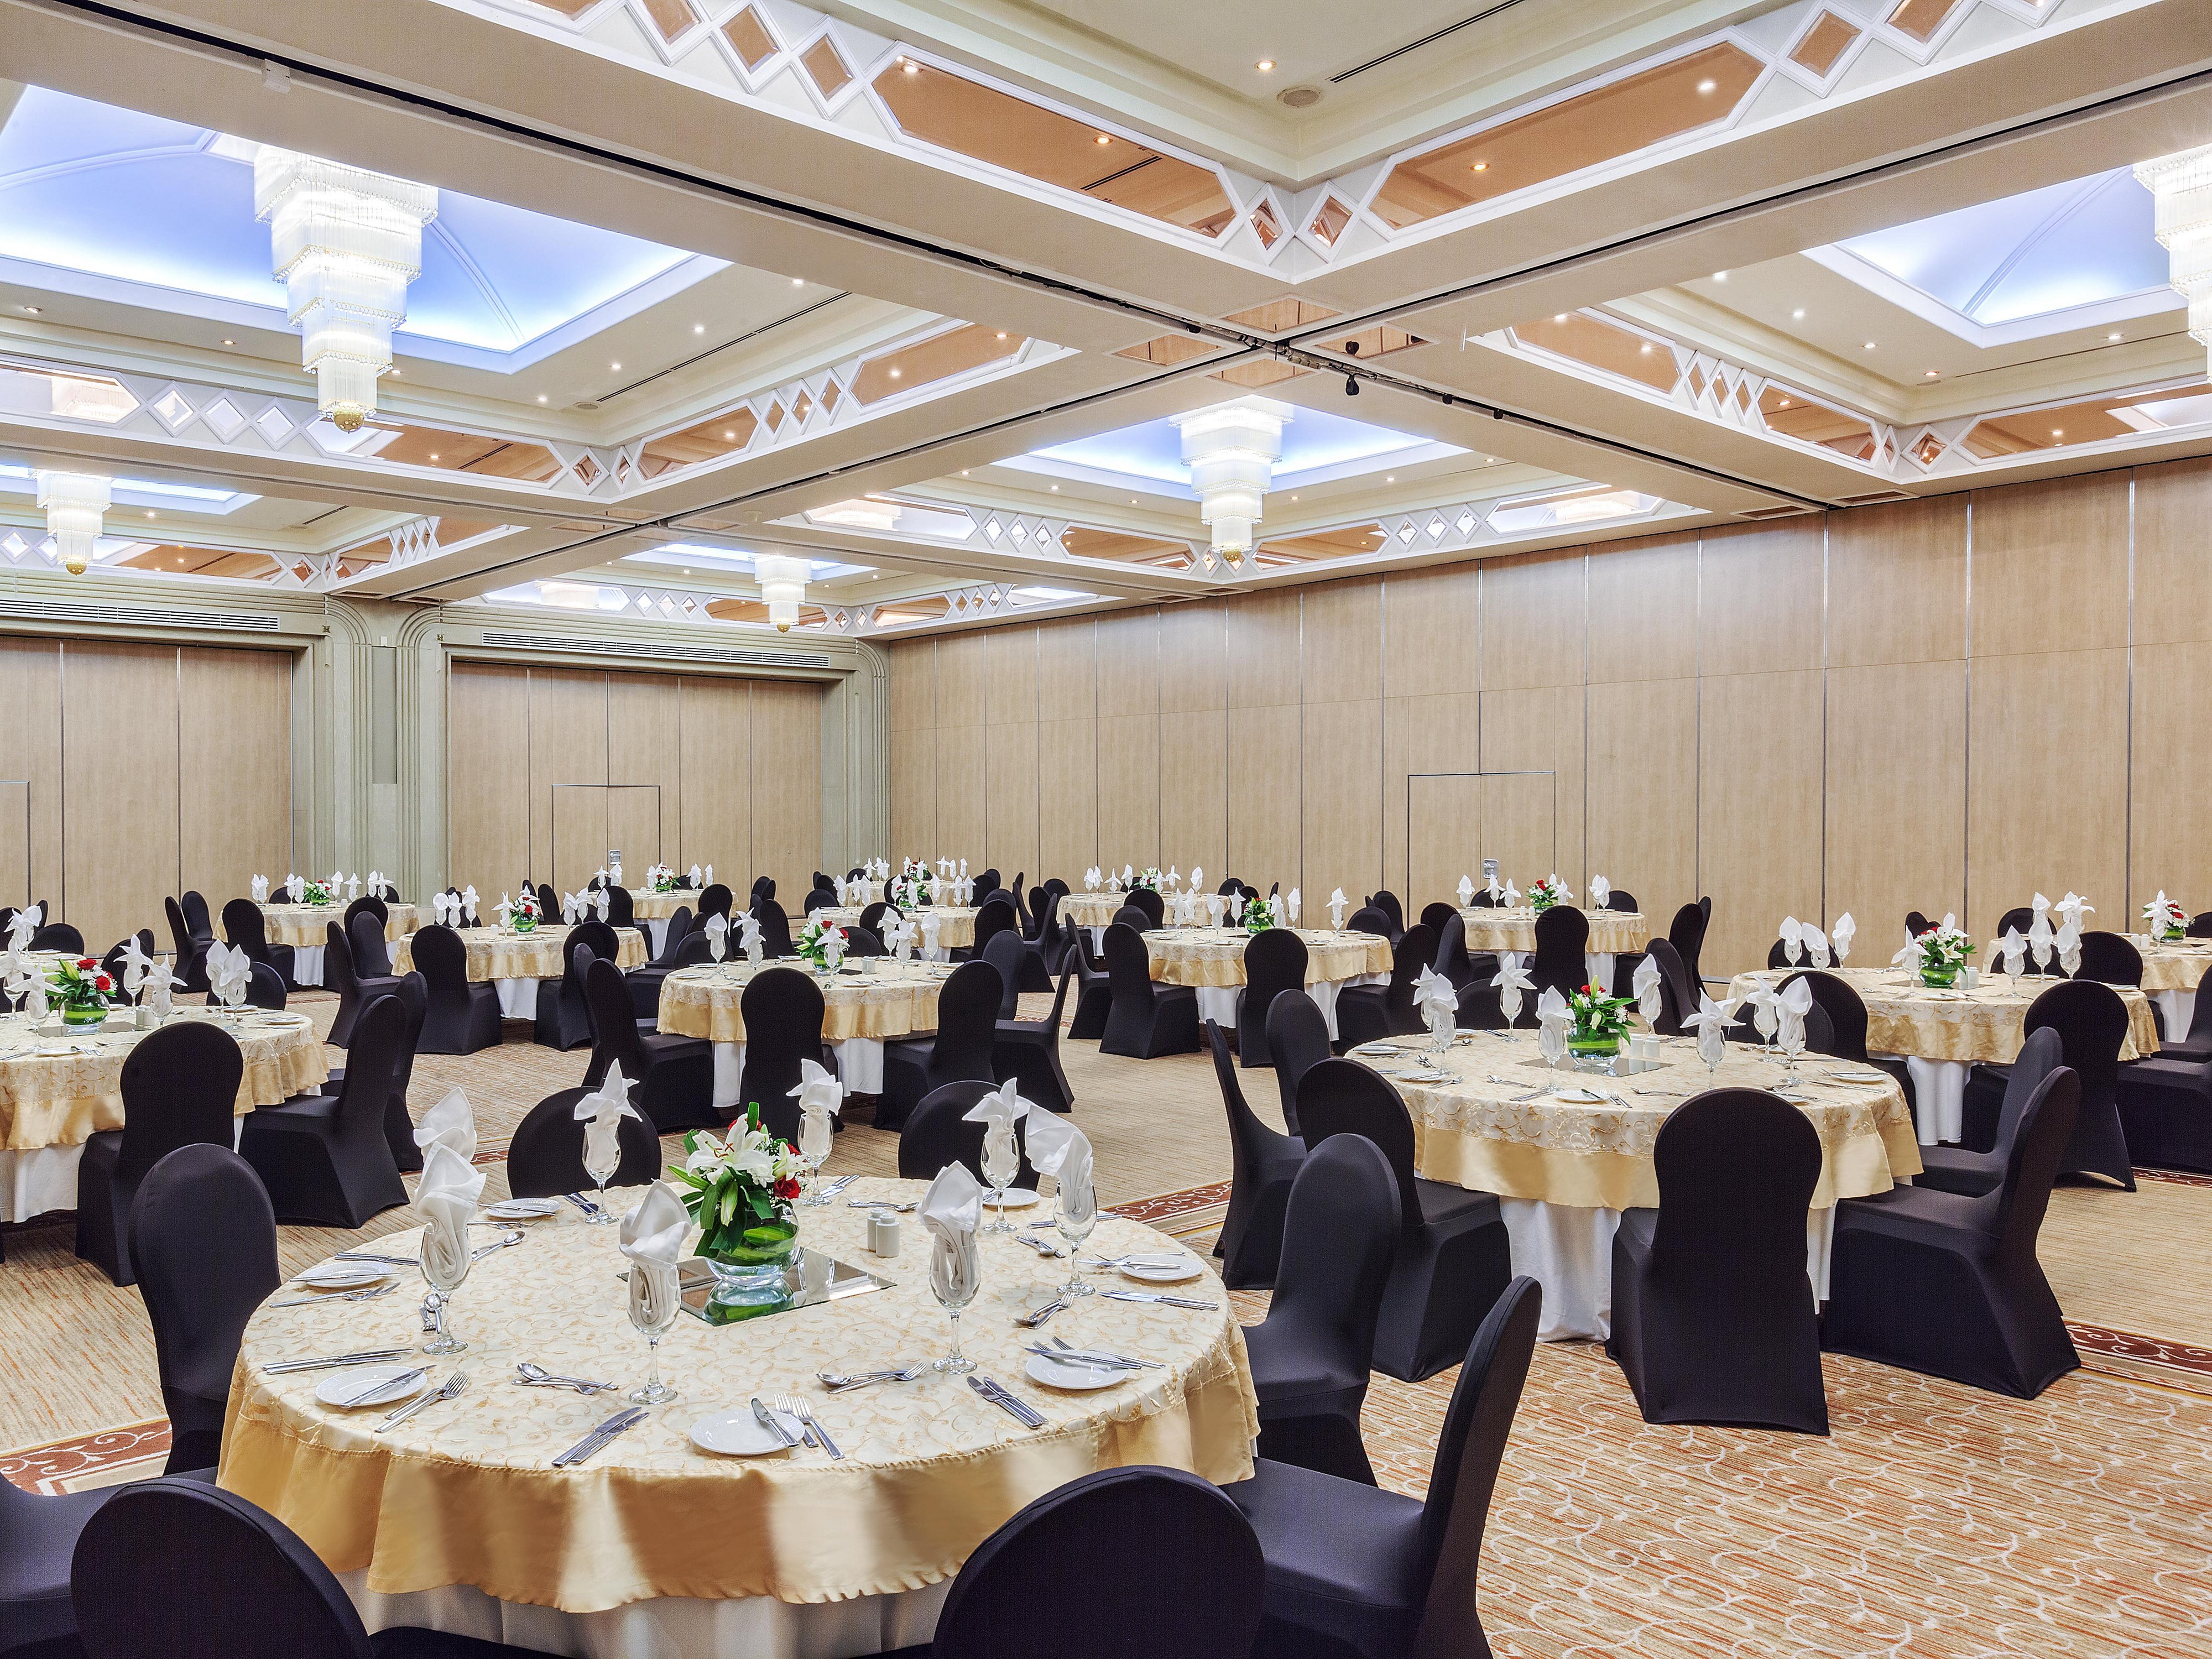 Crowne Plaza Dubai Hotel Meeting Rooms For Rent